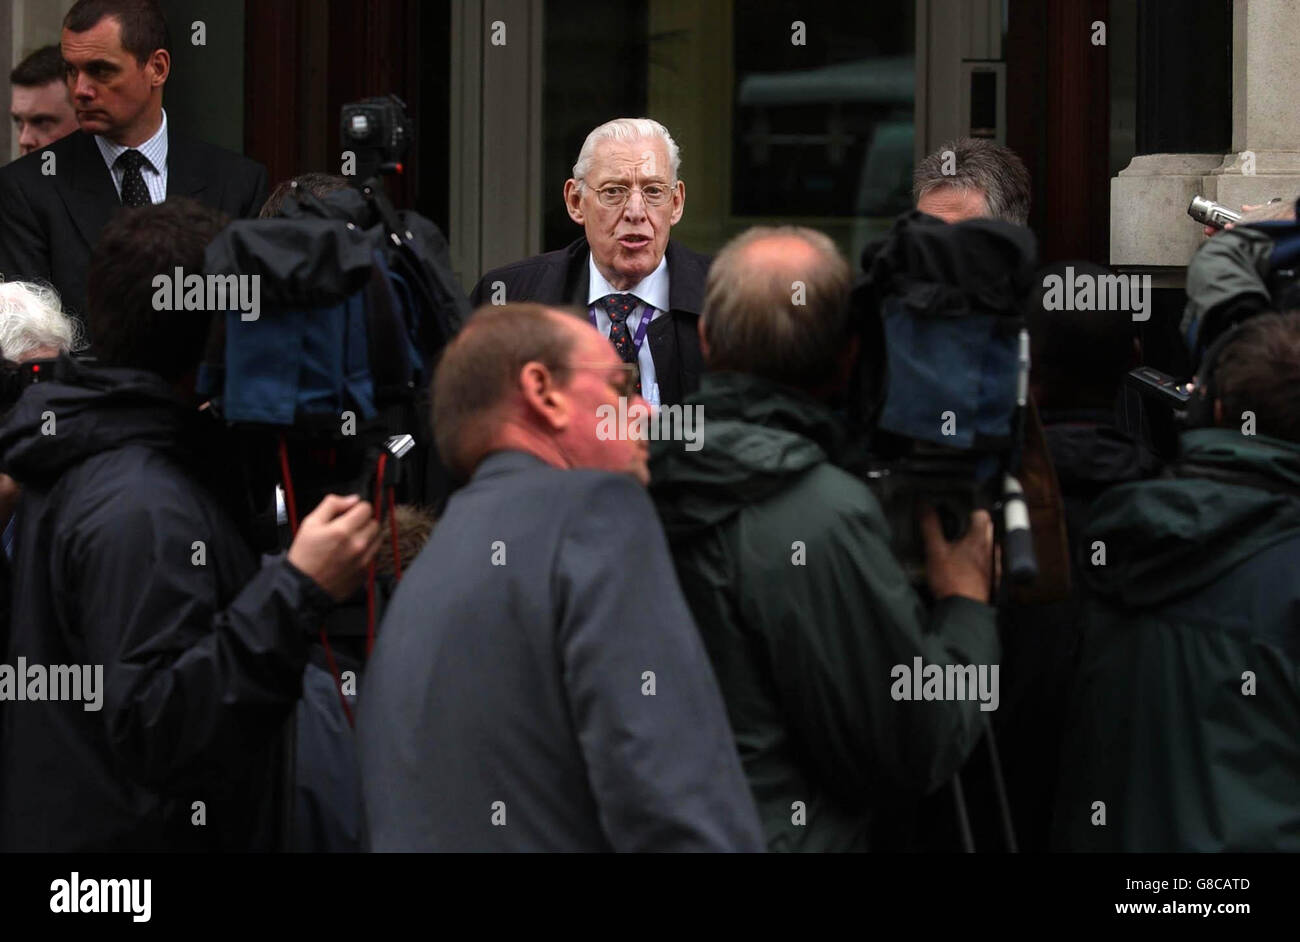 The leader of the D.U.P, Rev Ian Paisley faces the press. Rev Paisley earlier met Irish Taioseach Bertie Ahern for talks to discuss the Sinn Fein leader Gerry Adam's comments regarding the IRA's future. Stock Photo